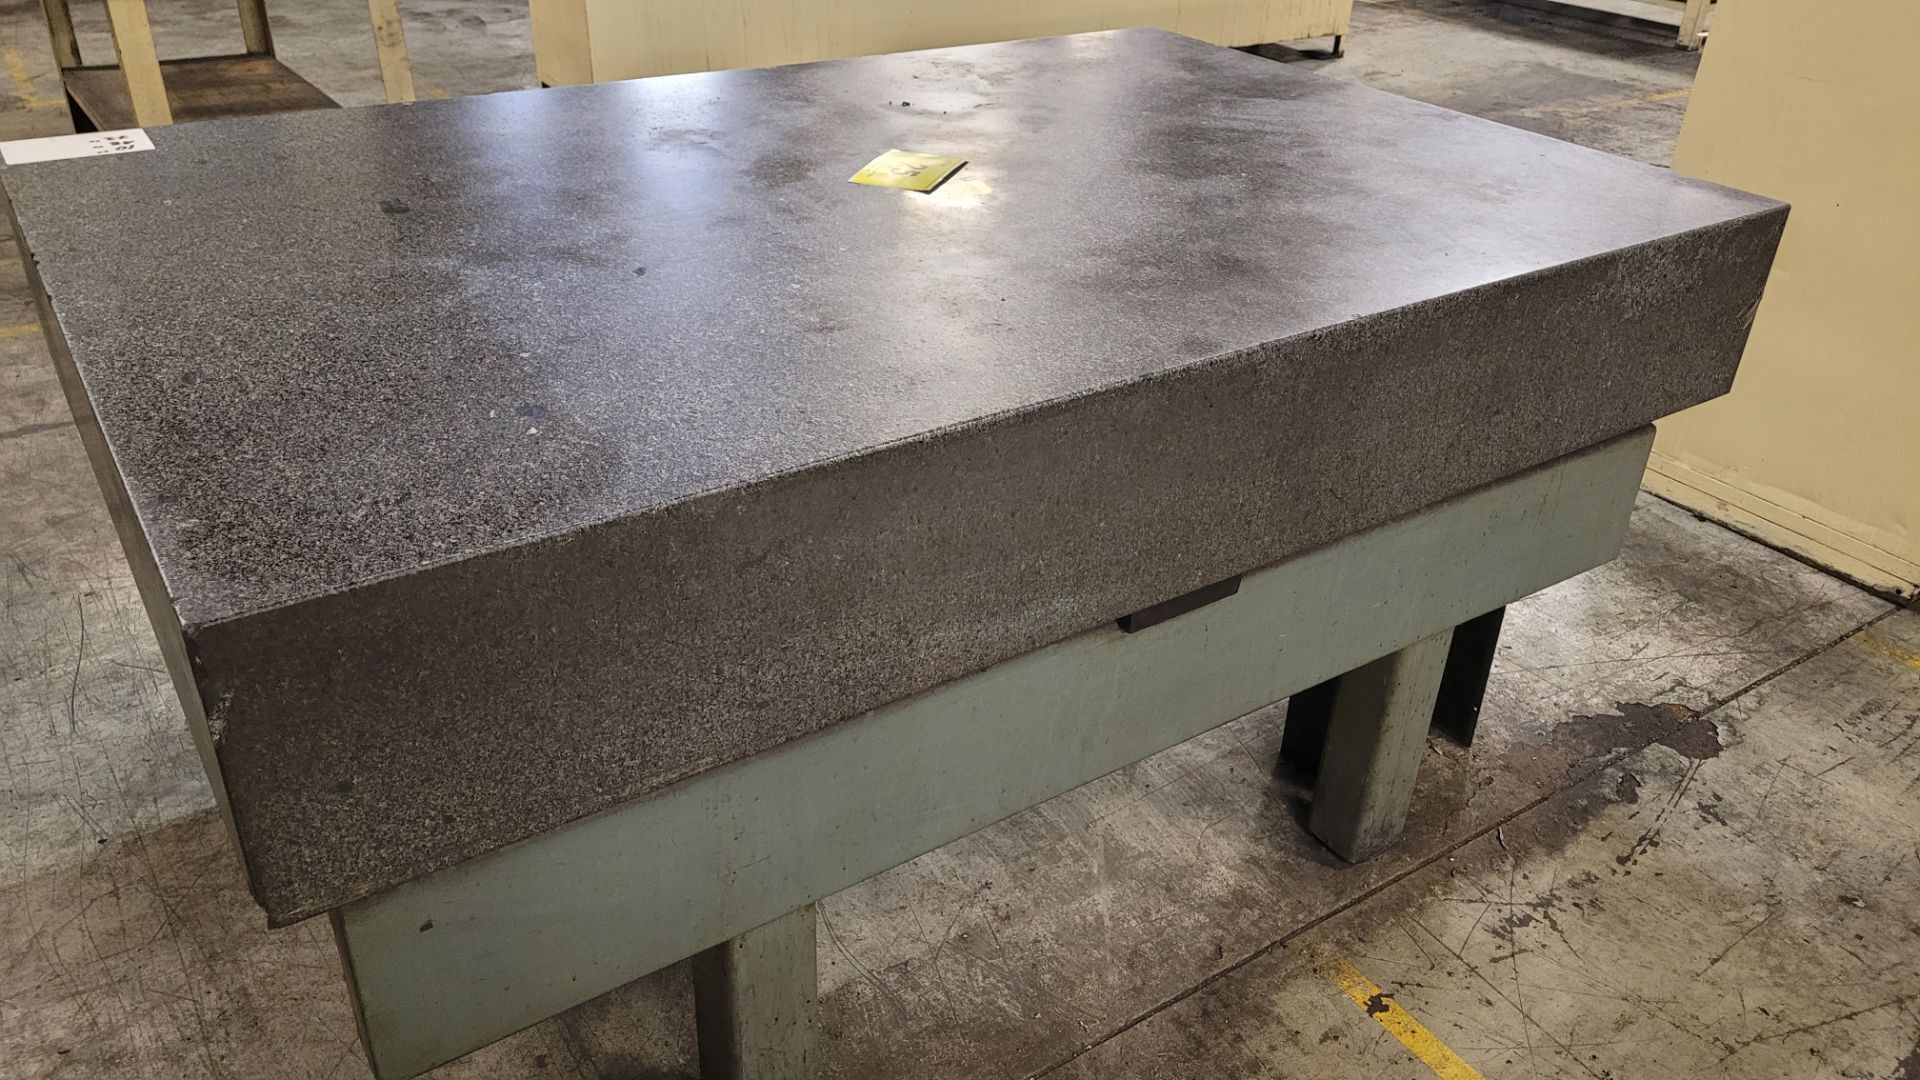 TRU-STONE CORPORATION APPROX. 10" X 48" X 72" GRANITE SURFACE PLATE ON STAND (RIGGING FEE $45) - Image 5 of 5